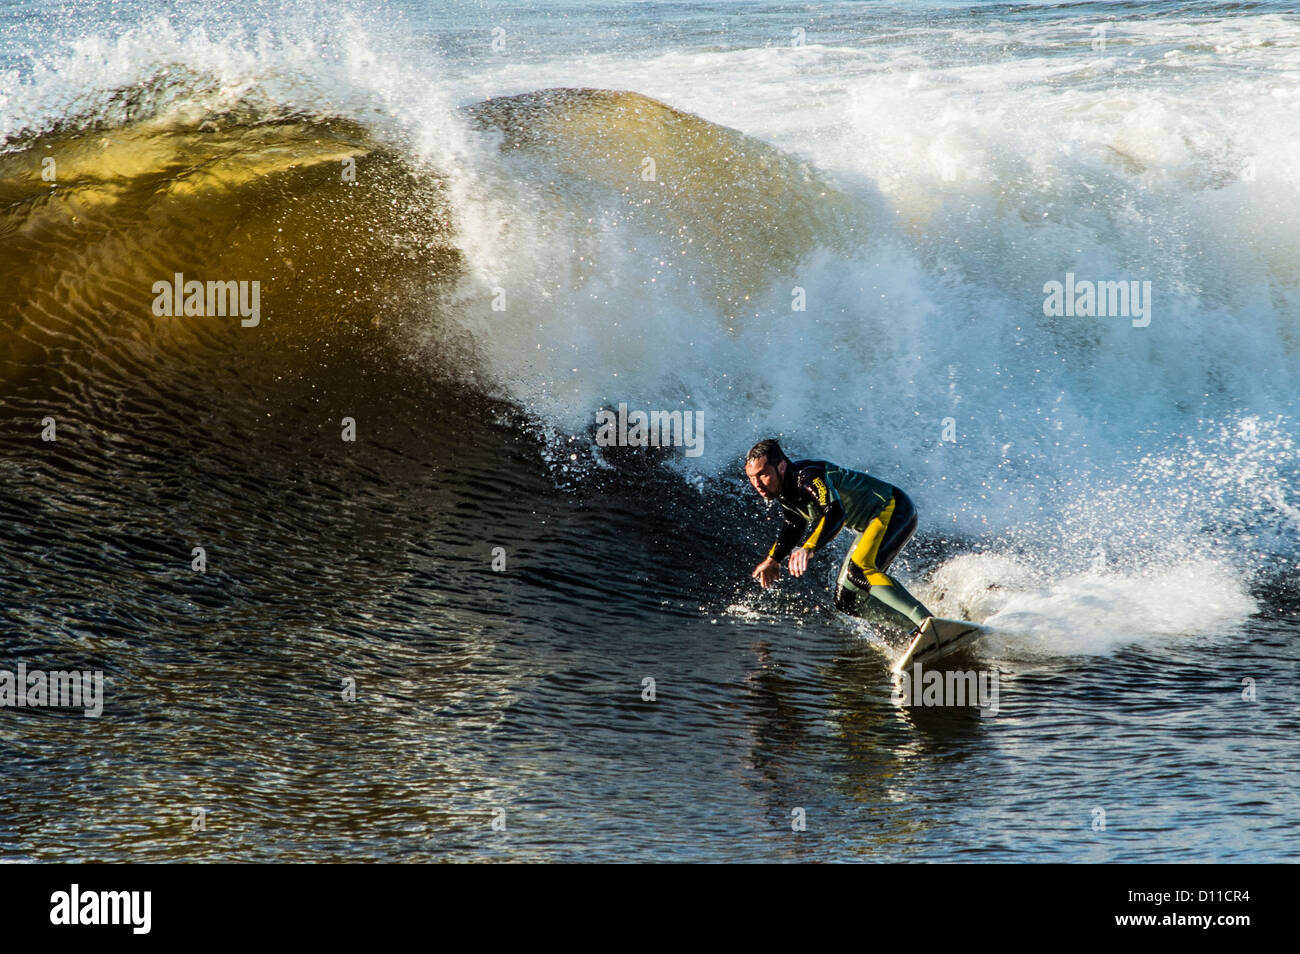 Aberystwyth Wales UK Surfers riding the waves at the mouth of the harbour in the warm autumn sunshine Stock Photo